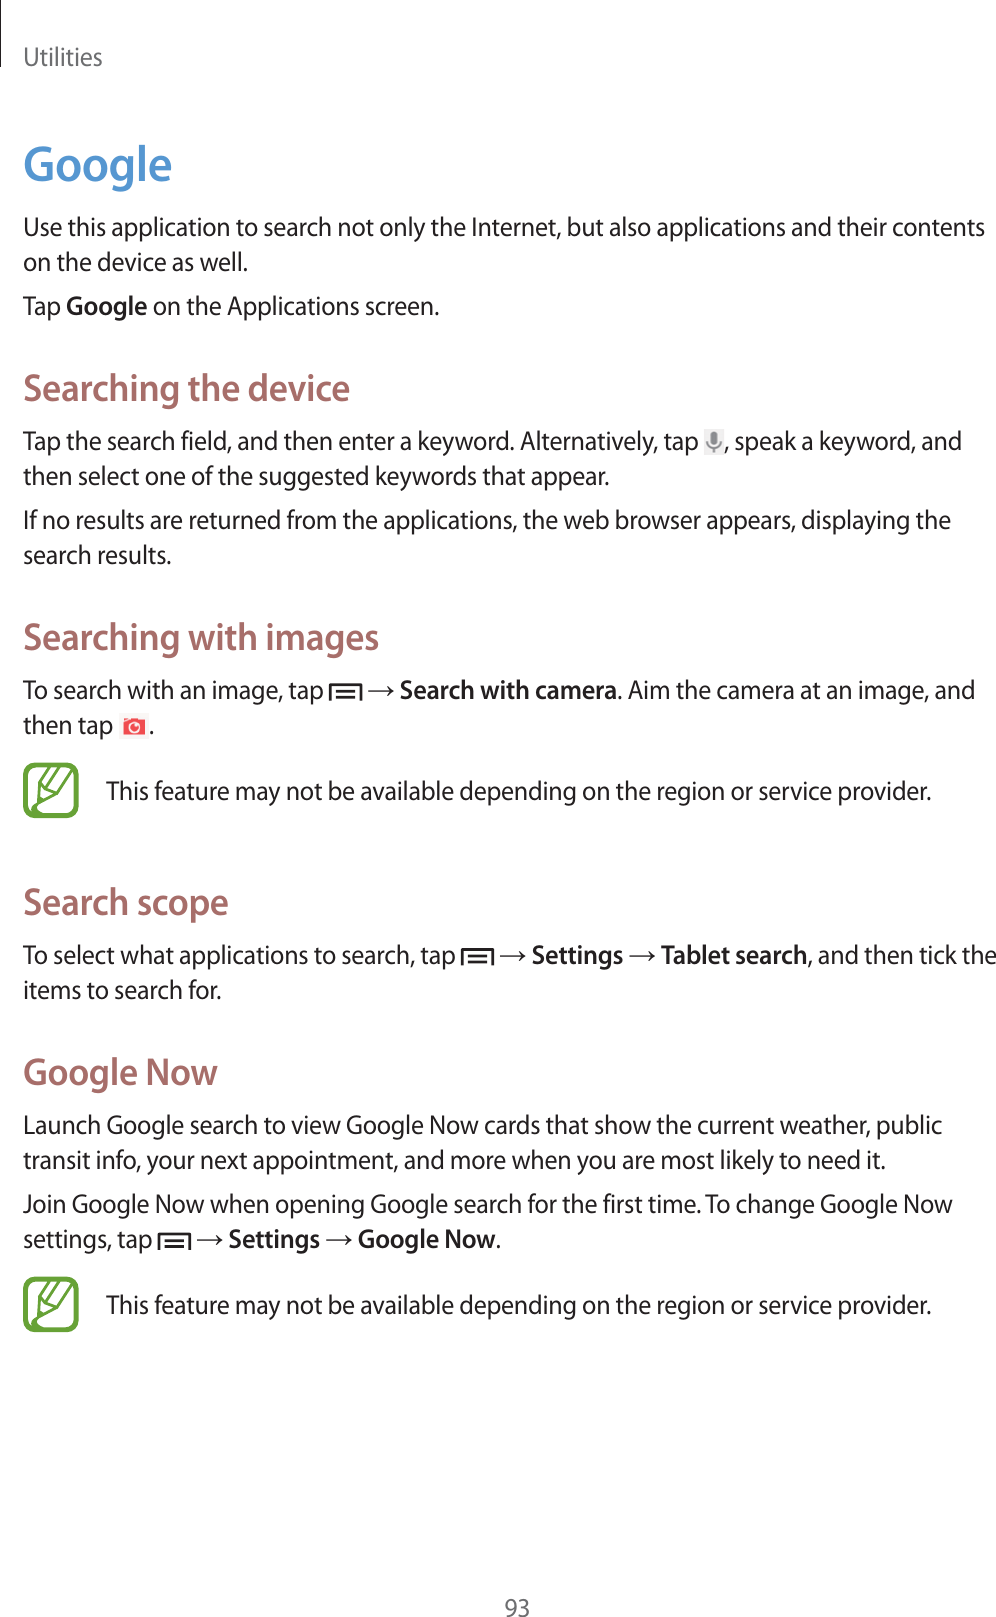 Utilities93GoogleUse this application to search not only the Internet, but also applications and their contents on the device as well.Tap Google on the Applications screen.Searching the deviceTap the search field, and then enter a keyword. Alternatively, tap  , speak a keyword, and then select one of the suggested keywords that appear.If no results are returned from the applications, the web browser appears, displaying the search results.Searching with imagesTo search with an image, tap   ĺ Search with camera. Aim the camera at an image, and then tap  .This feature may not be available depending on the region or service provider.Search scopeTo select what applications to search, tap   ĺ Settings ĺ Tablet search, and then tick the items to search for.Google NowLaunch Google search to view Google Now cards that show the current weather, public transit info, your next appointment, and more when you are most likely to need it.Join Google Now when opening Google search for the first time. To change Google Now settings, tap   ĺ Settings ĺ Google Now.This feature may not be available depending on the region or service provider.